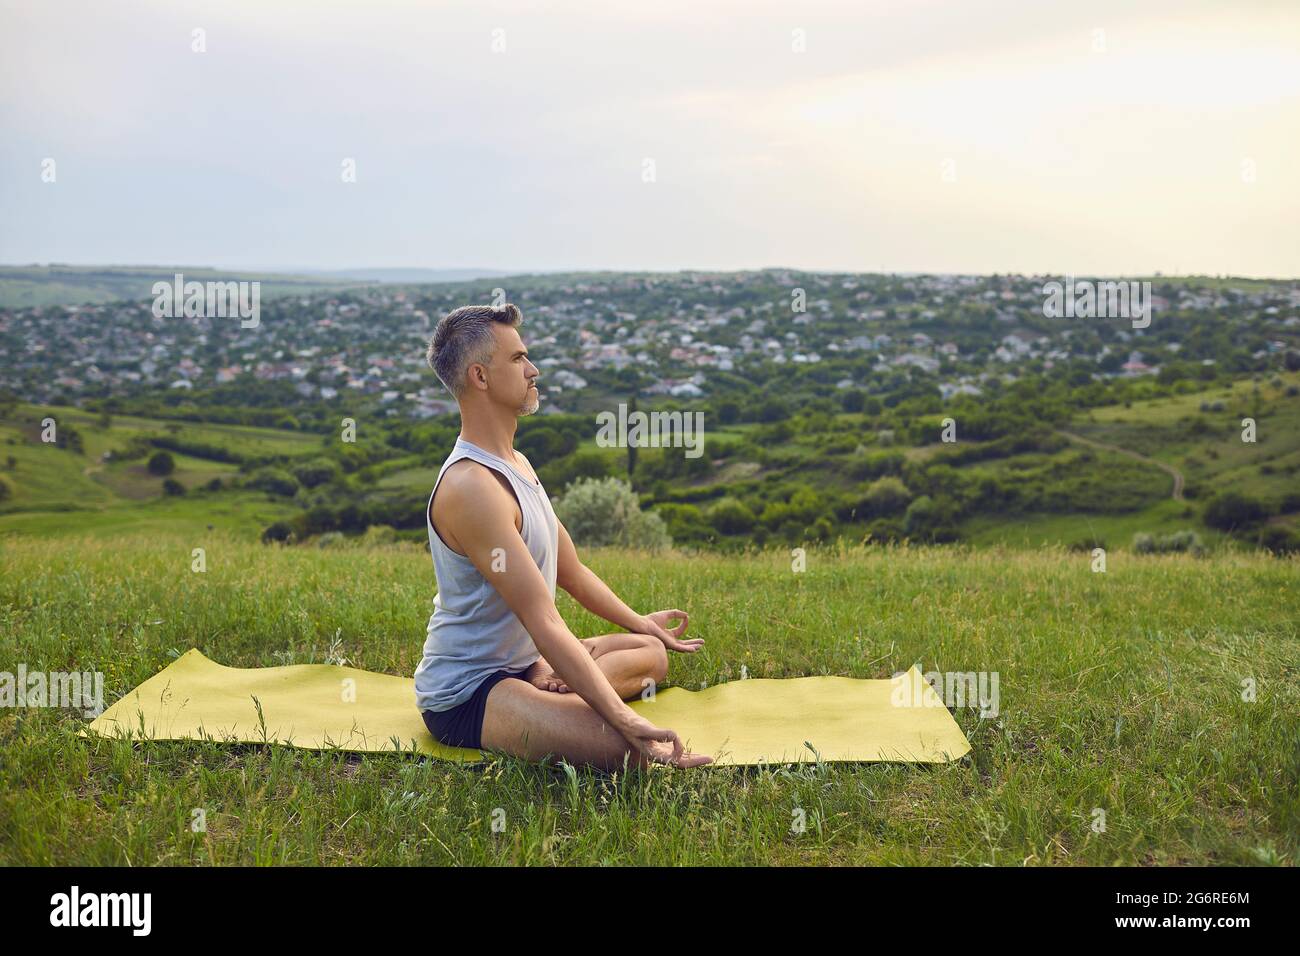 Yoga. A man with gray hair practices meditation on nature in summer. Stock Photo